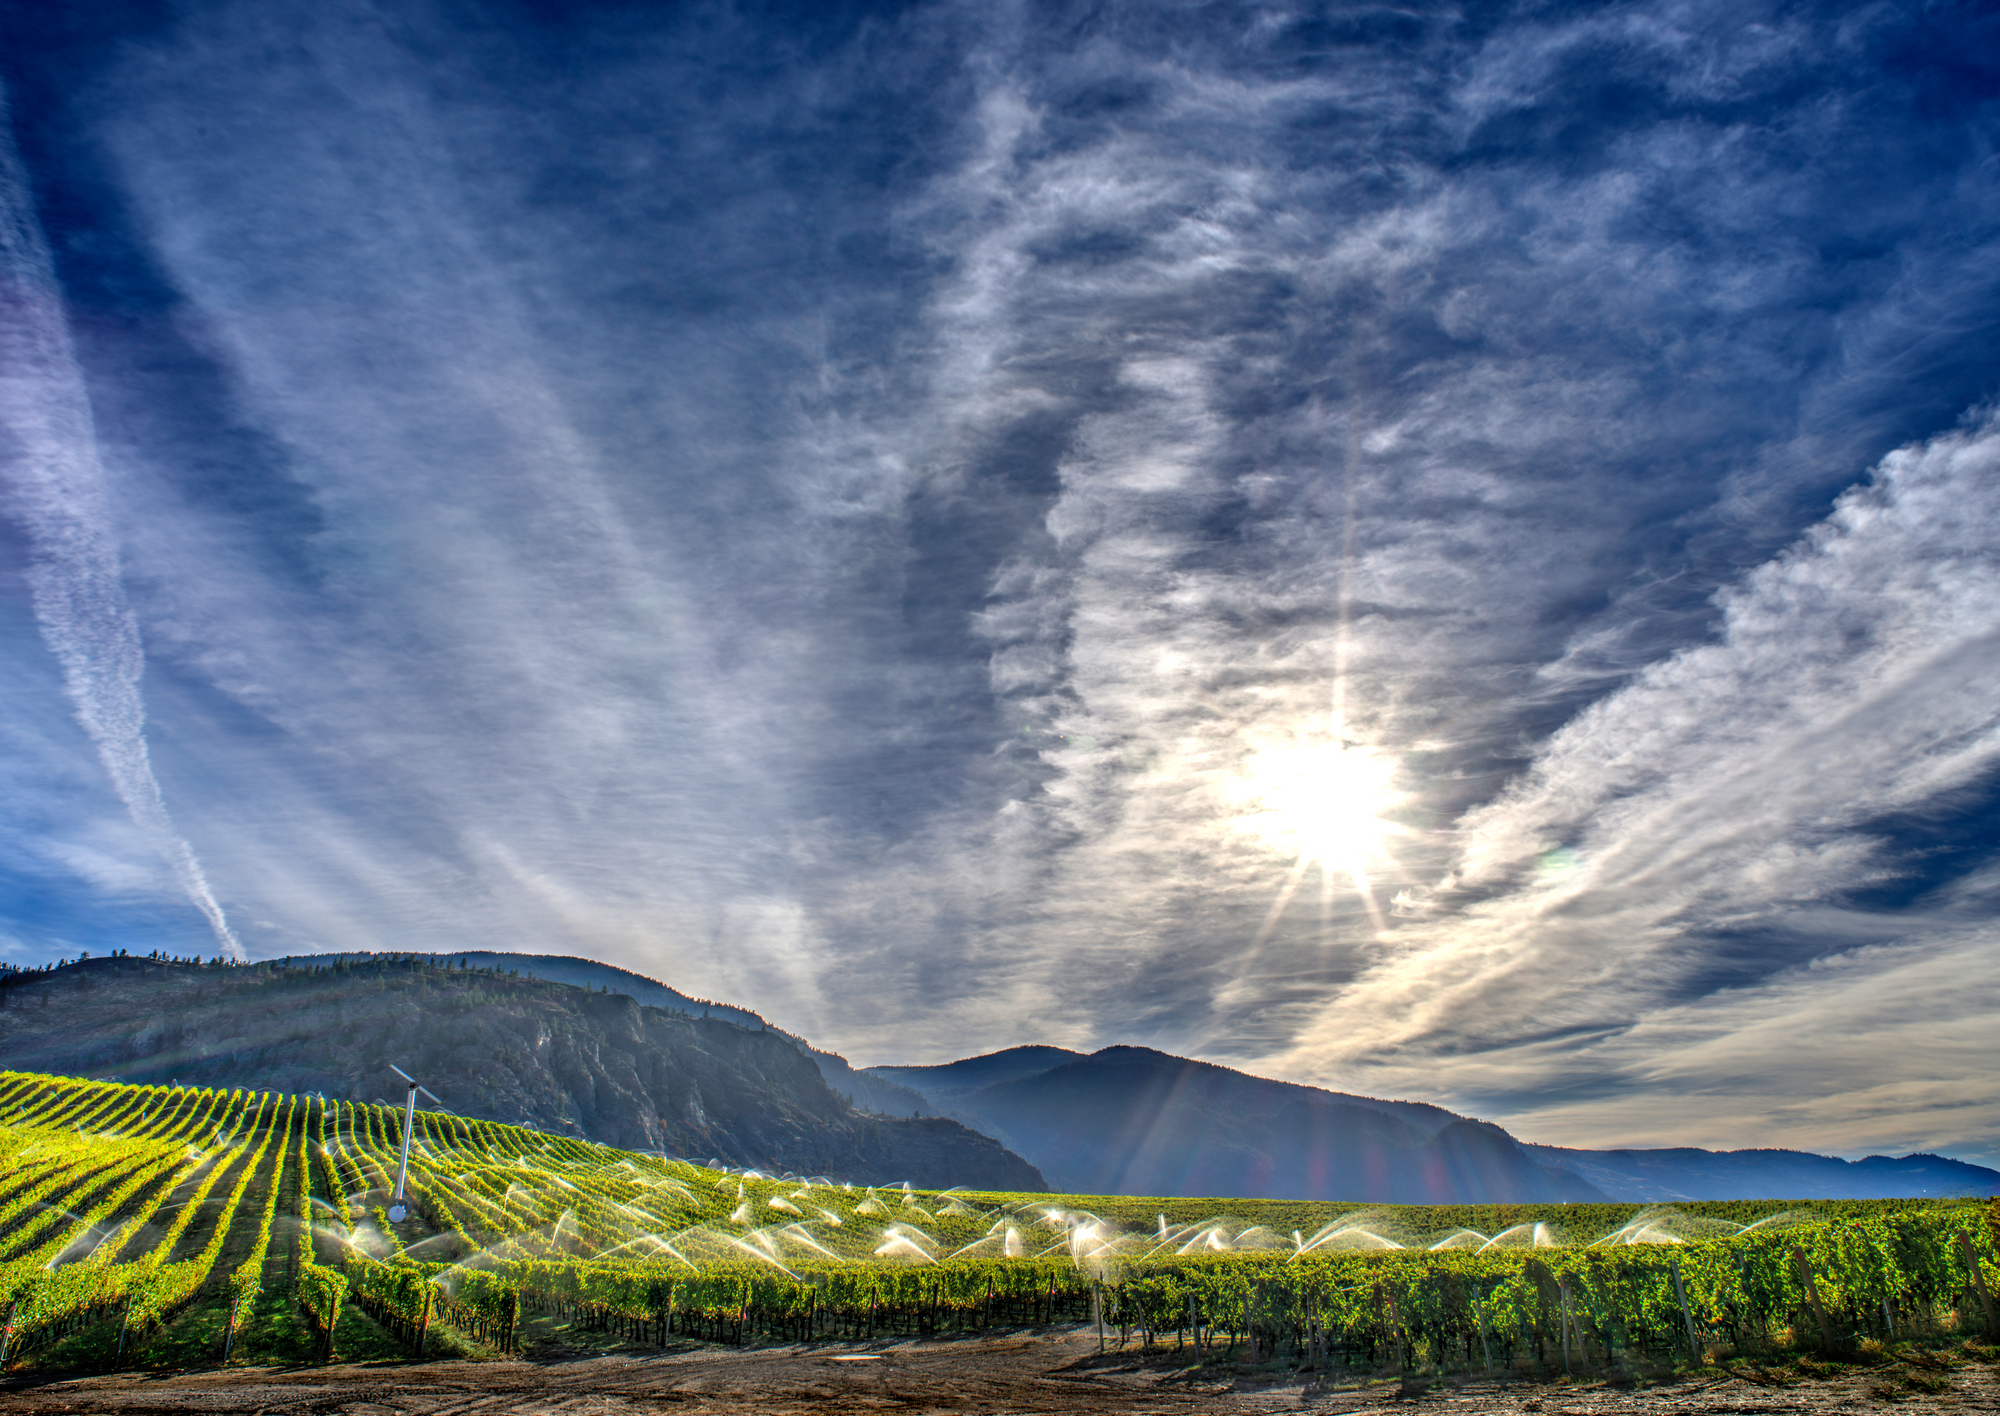 For some Okanagan vintners, increased irrigation was needed to combat drought conditions / Arterra Winery